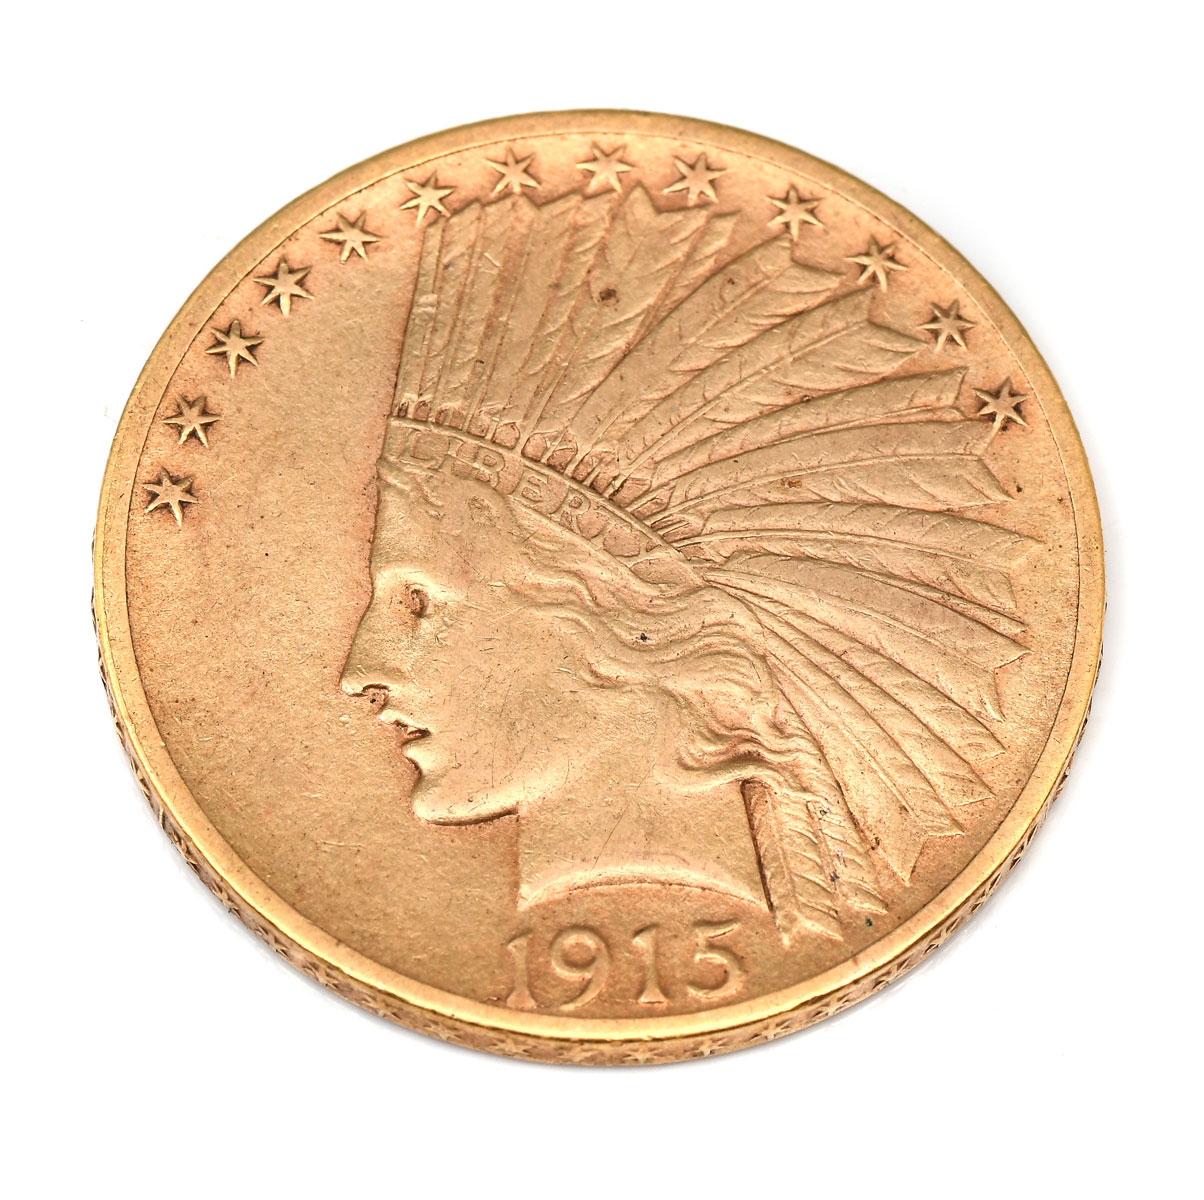 INDIAN 1915 $10 GOLD COIN: Resides